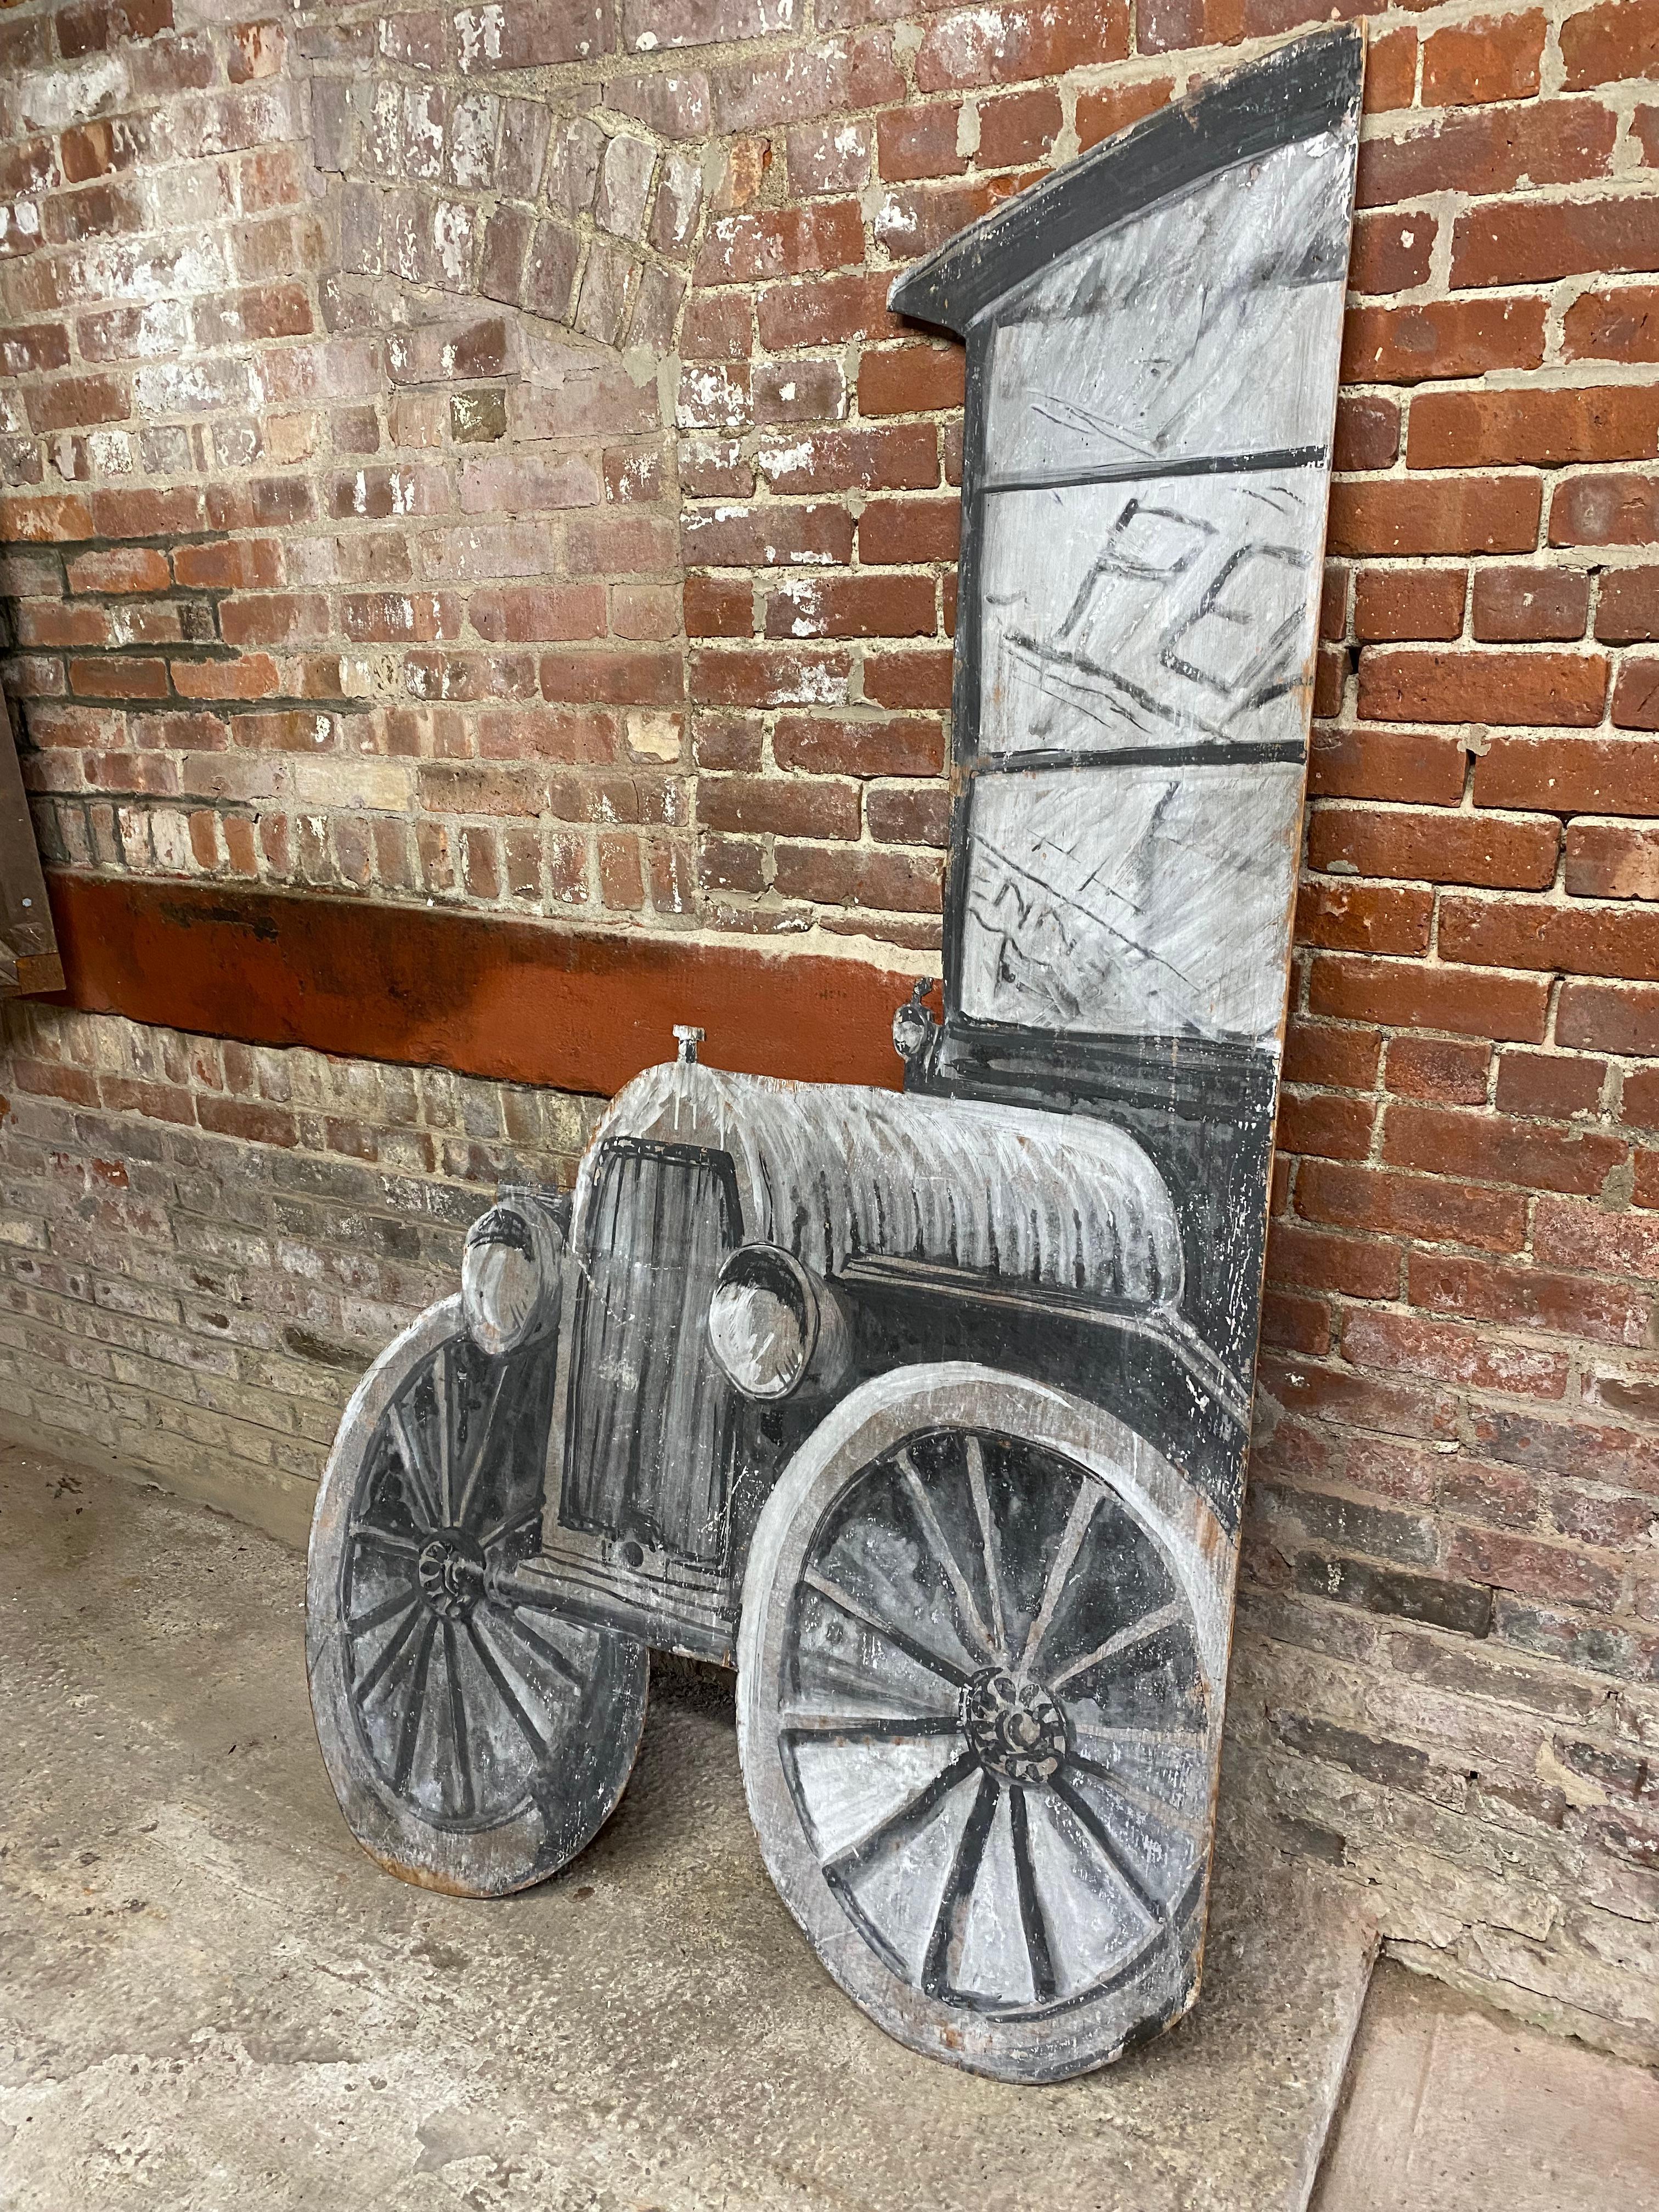 Spectacular hand-painted theater background prop. Painted in a monochromatic palette of black, white and gray. A cut out rendering of a front end of a Ford Model-T truck. This theater prop came from an Upstate New York community theater company.